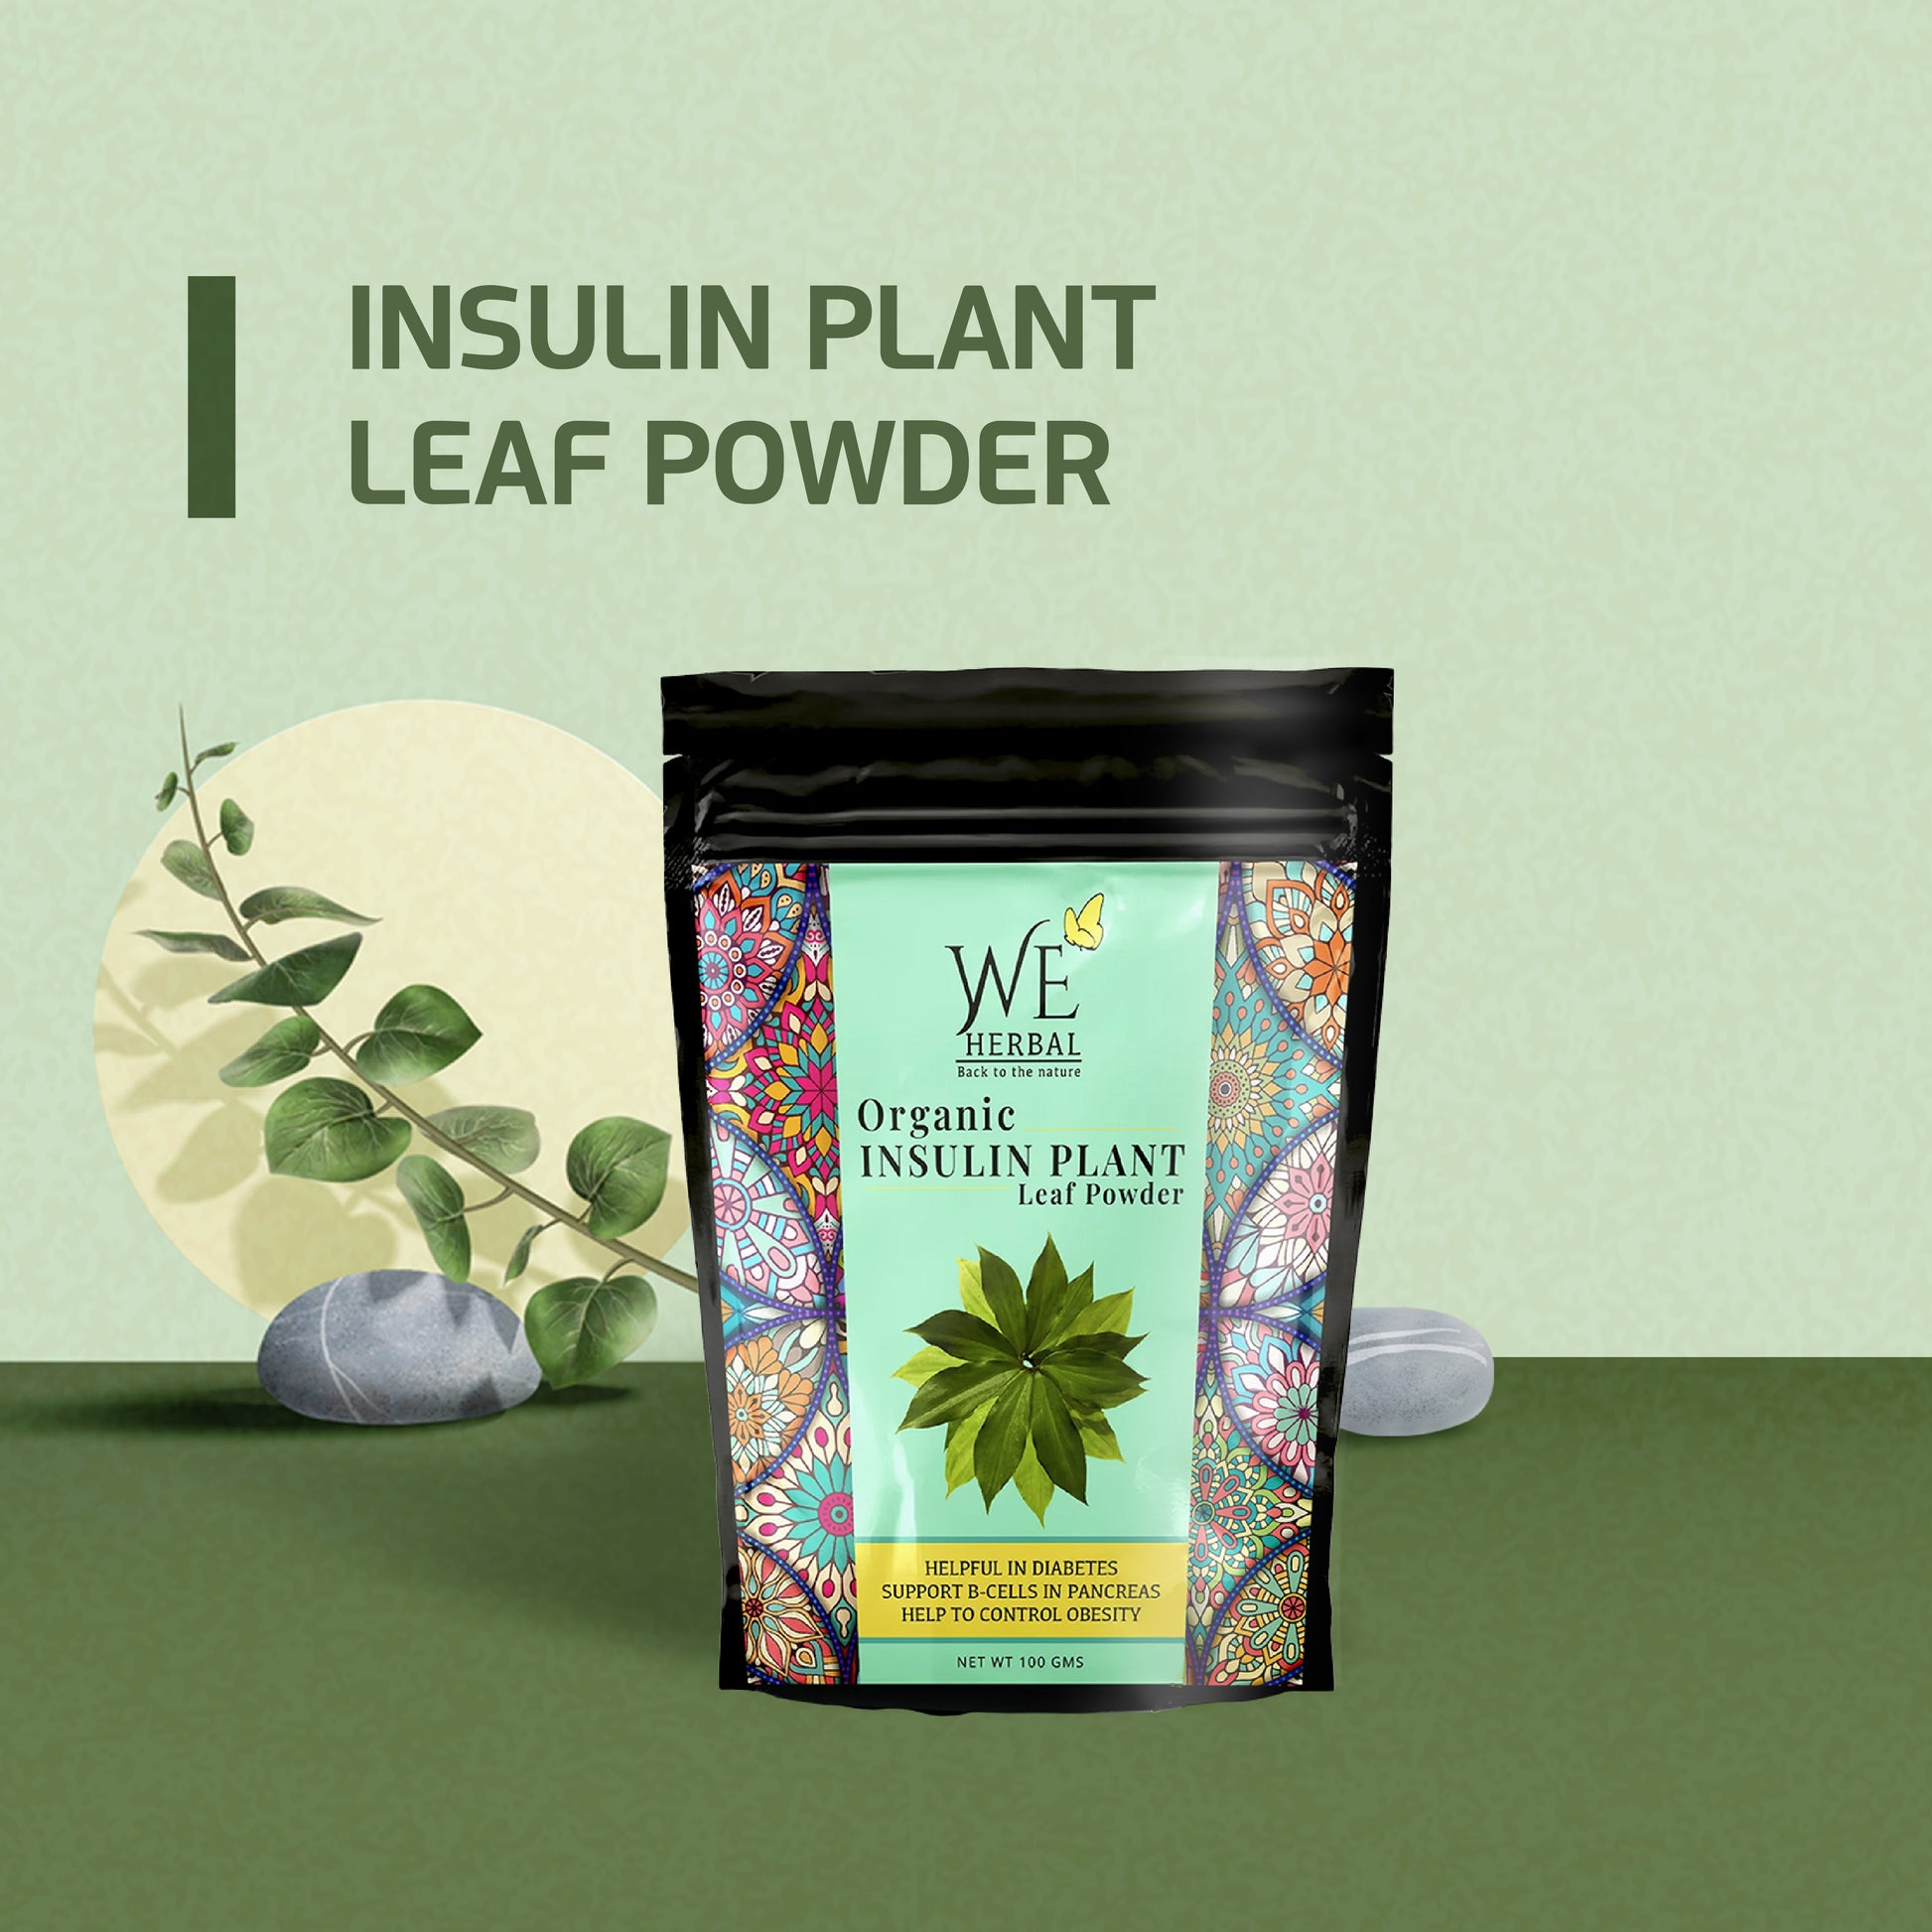 Insulin Plant Leaf Powder | Insulin Plant We Herbal | Back to the Nature